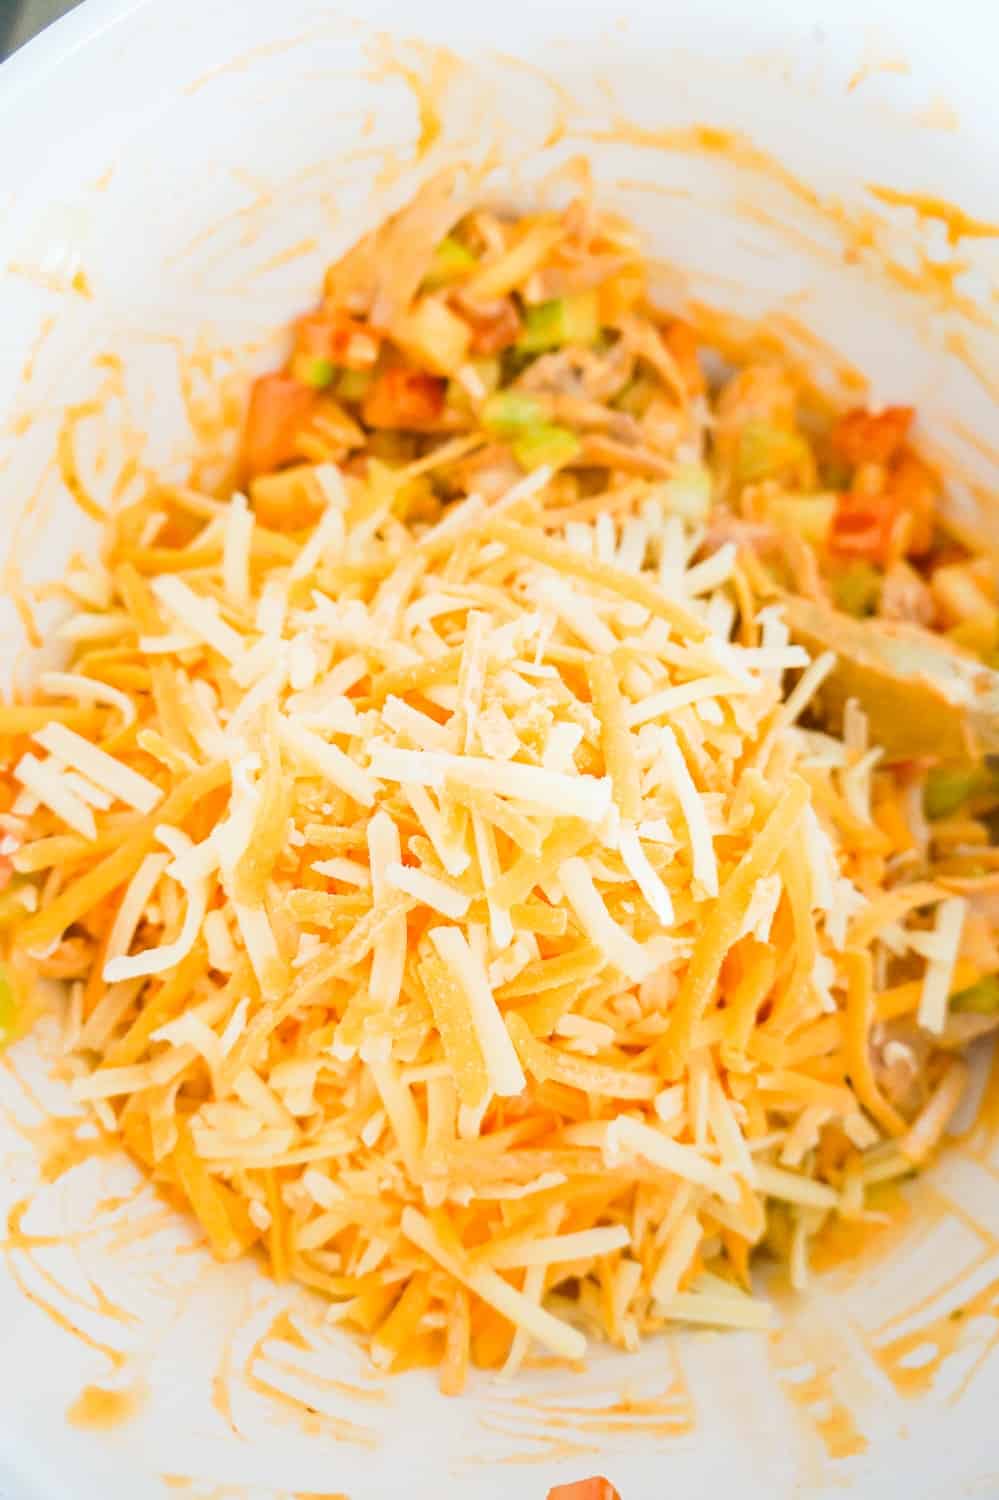 shredded cheddar cheese on top of buffalo chicken mixture in a mixing bowl